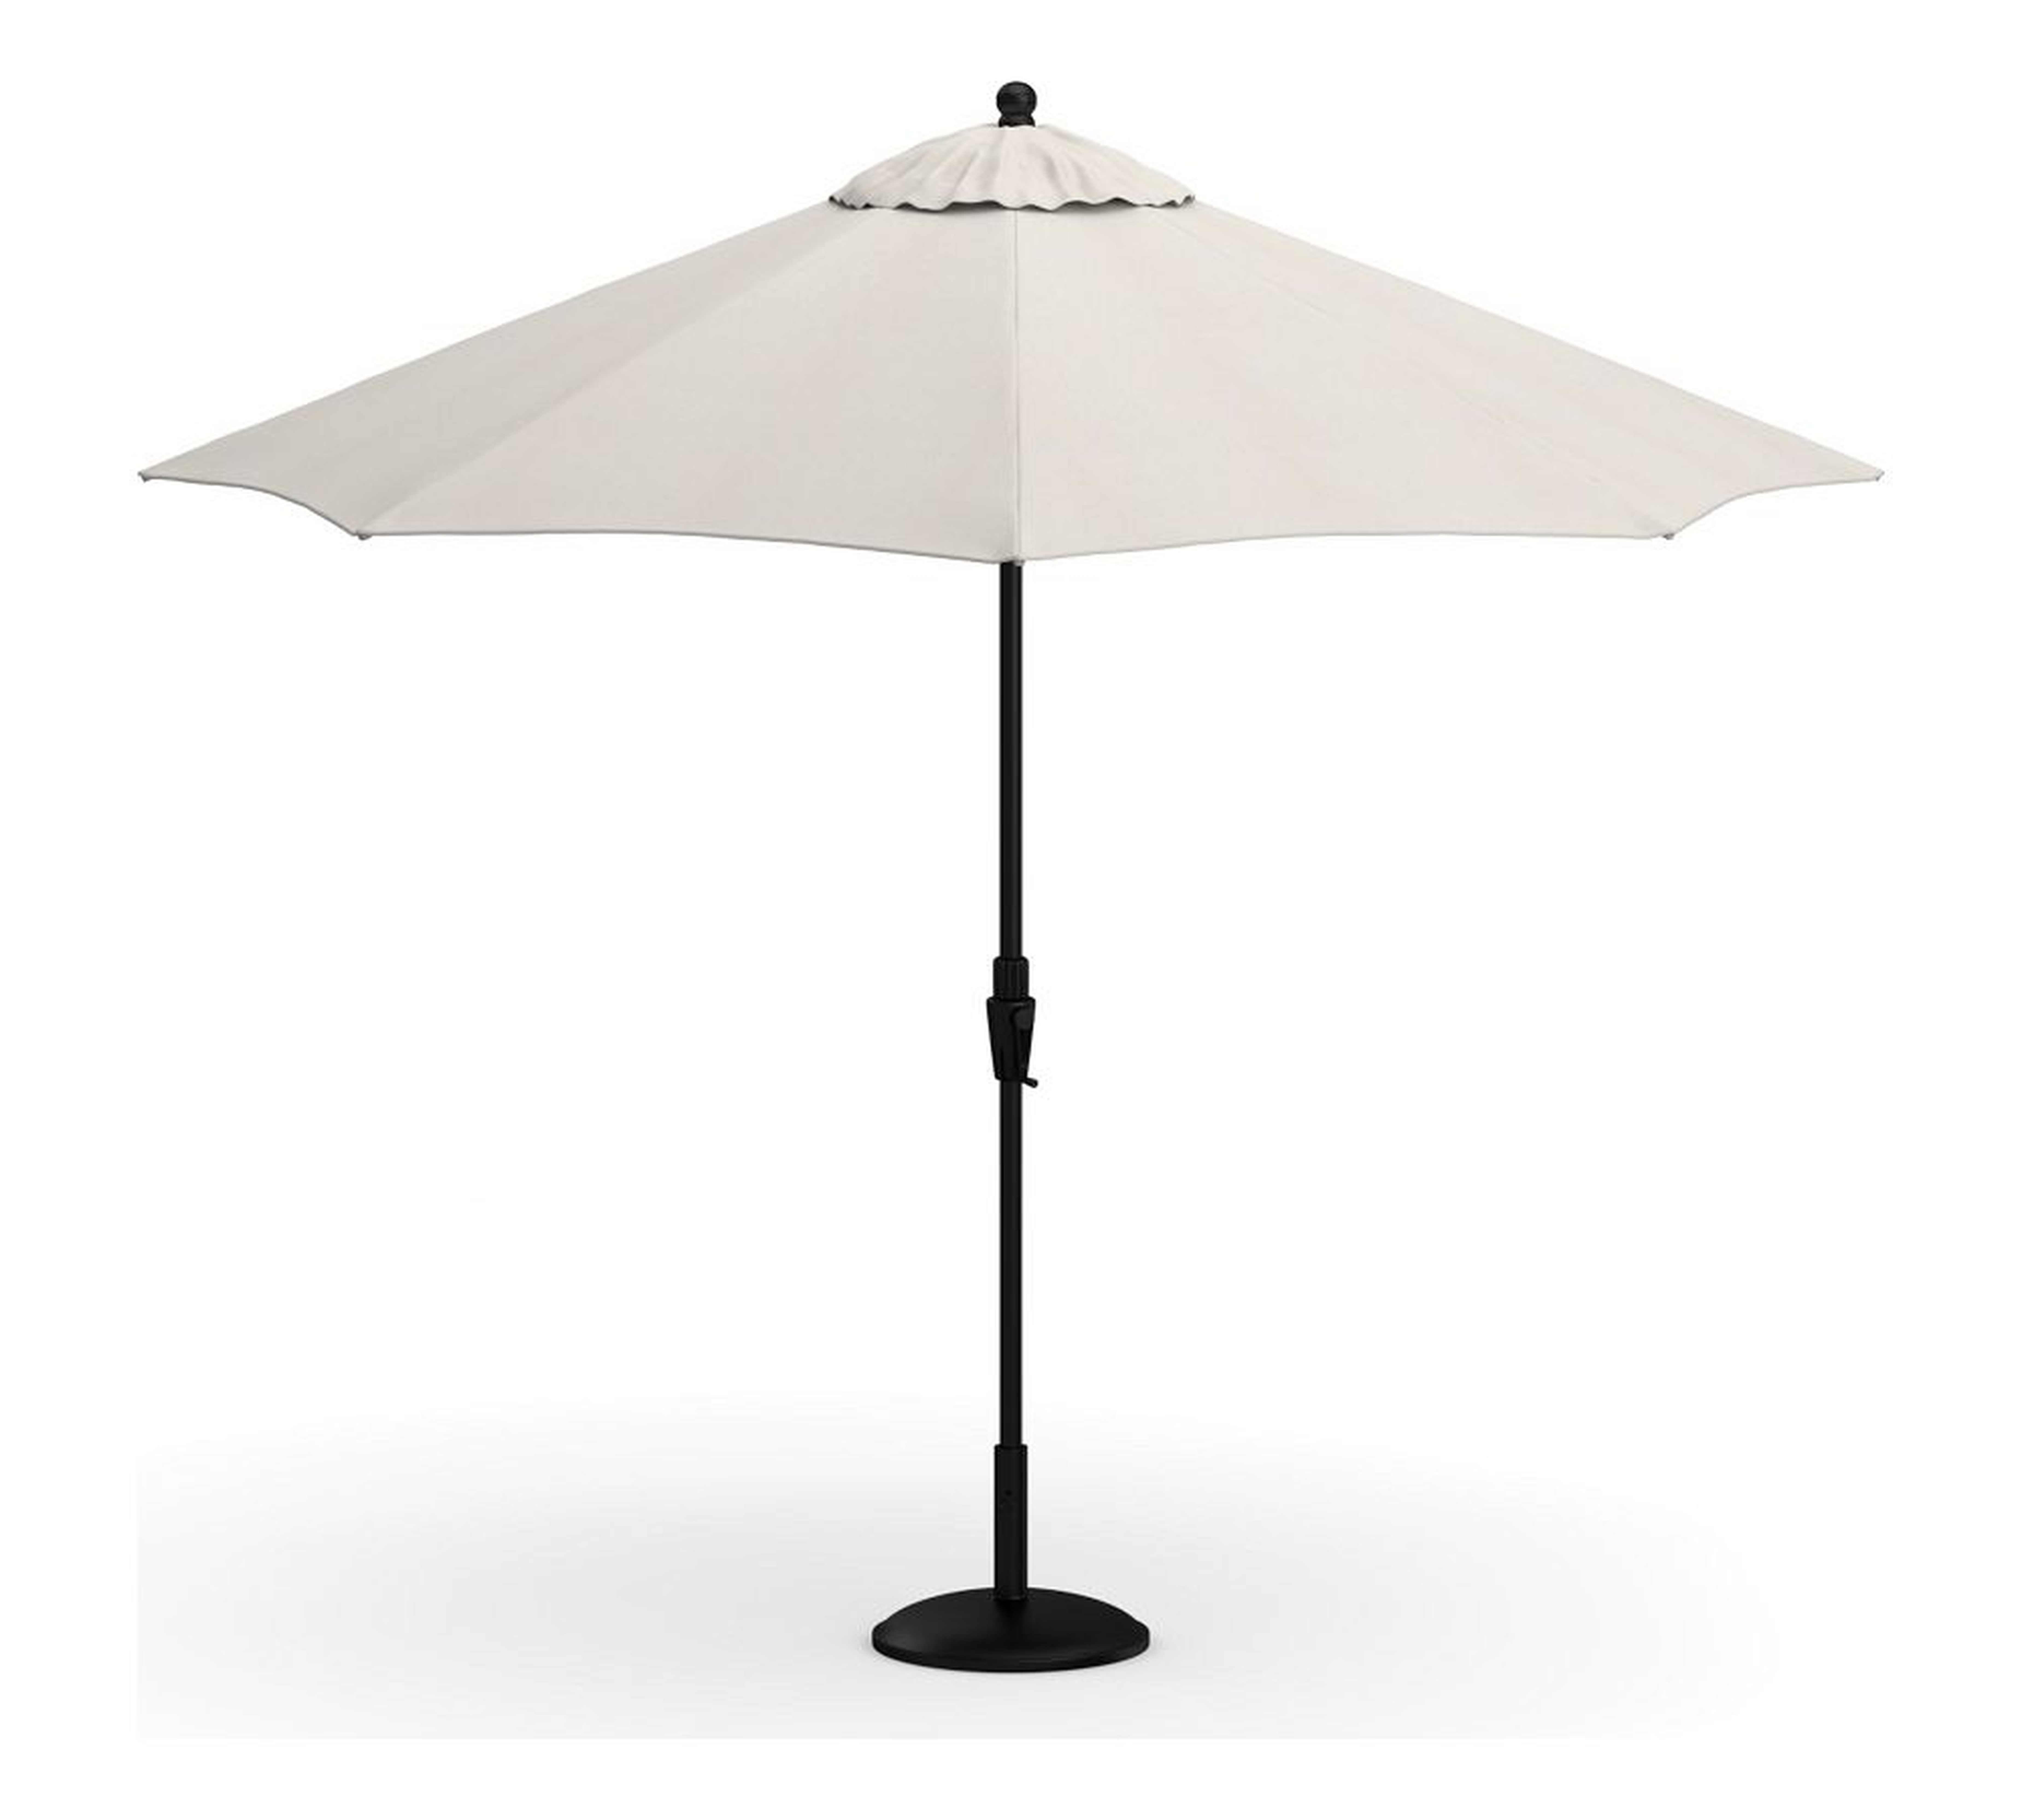 9' Round Umbrella with Aluminum Tilt Pole, Water-Resistant Canvas; Natural - Pottery Barn